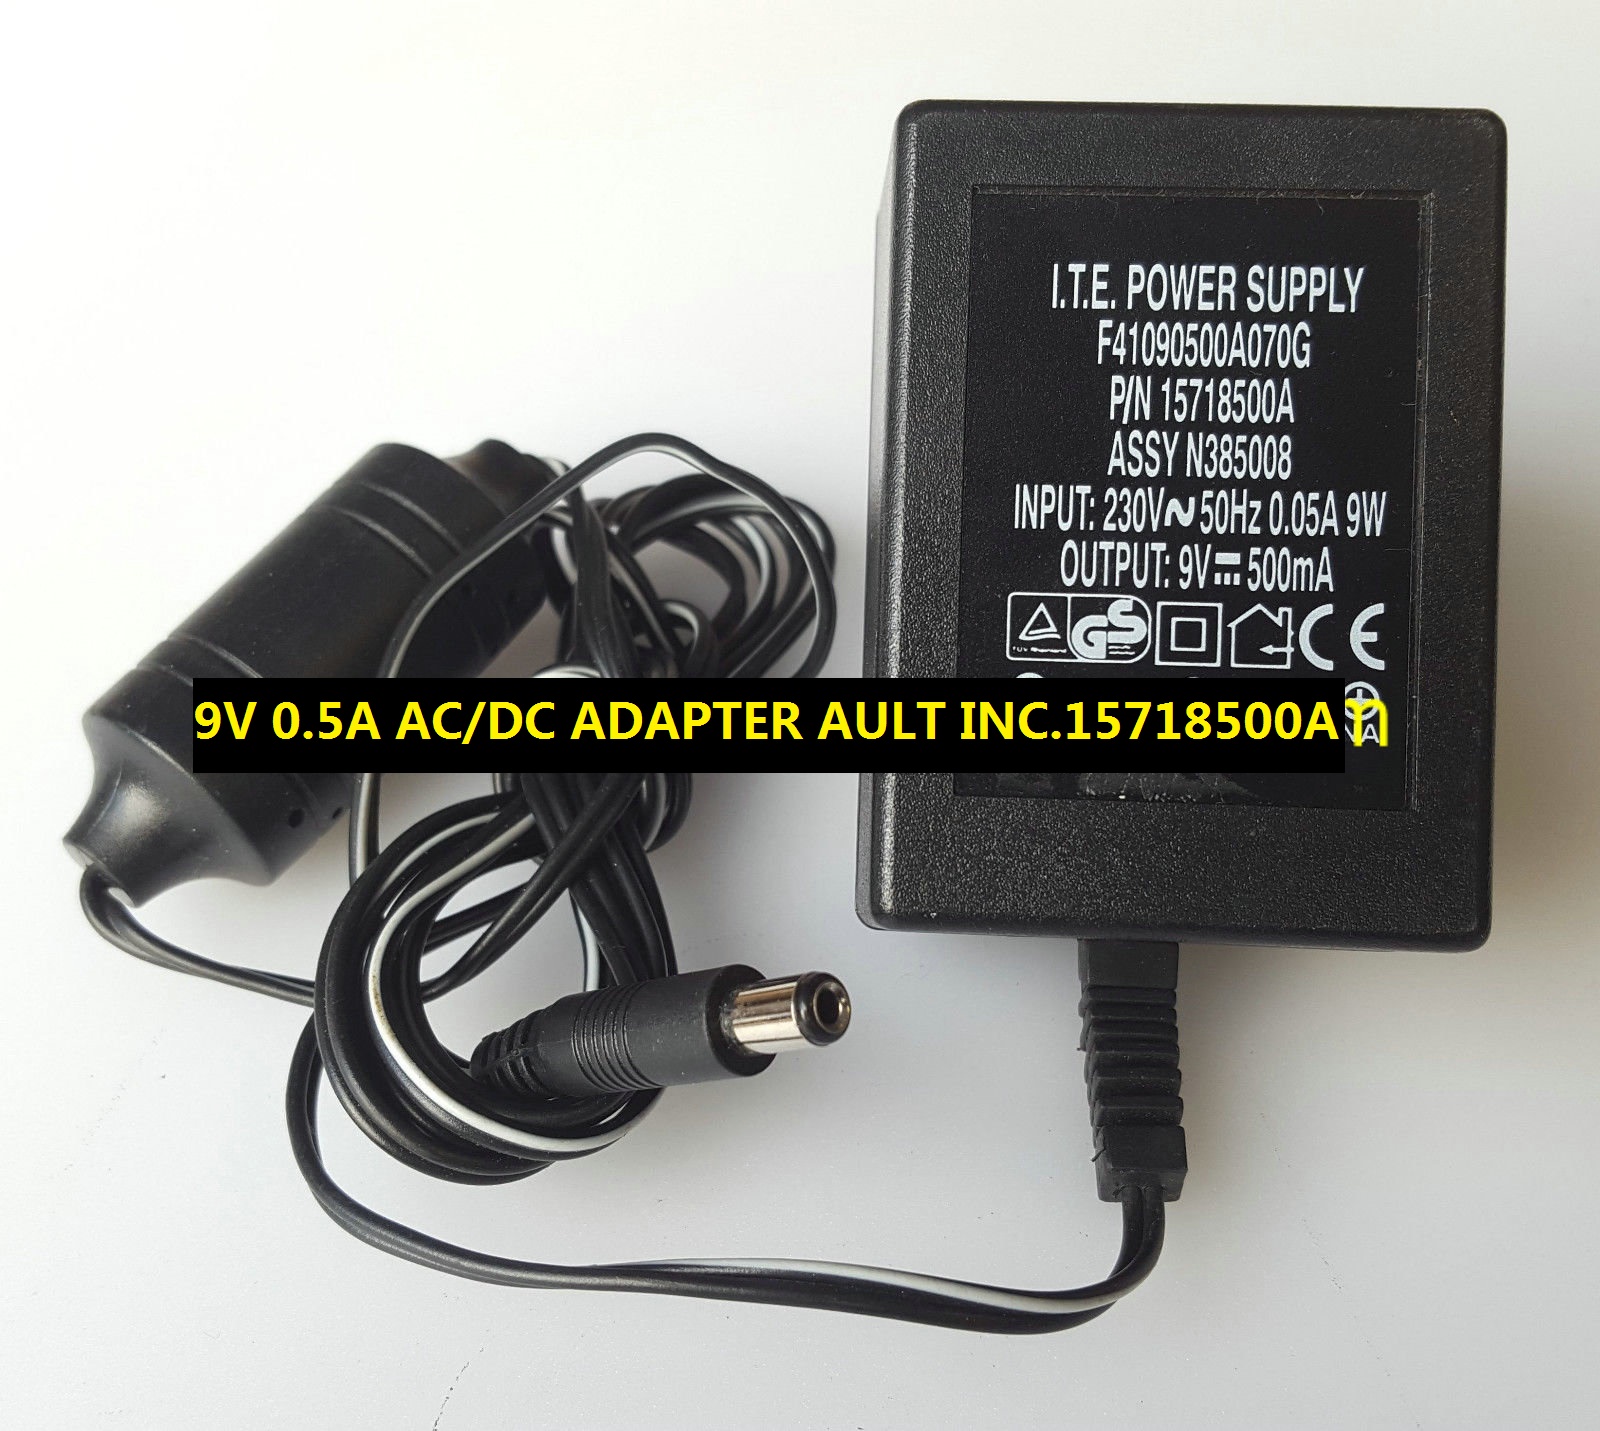 *100% Brand NEW* 9V 0.5A AC/DC ADAPTER AULT INC.15718500A for F41090500A070G POWER SUPPLY - Click Image to Close